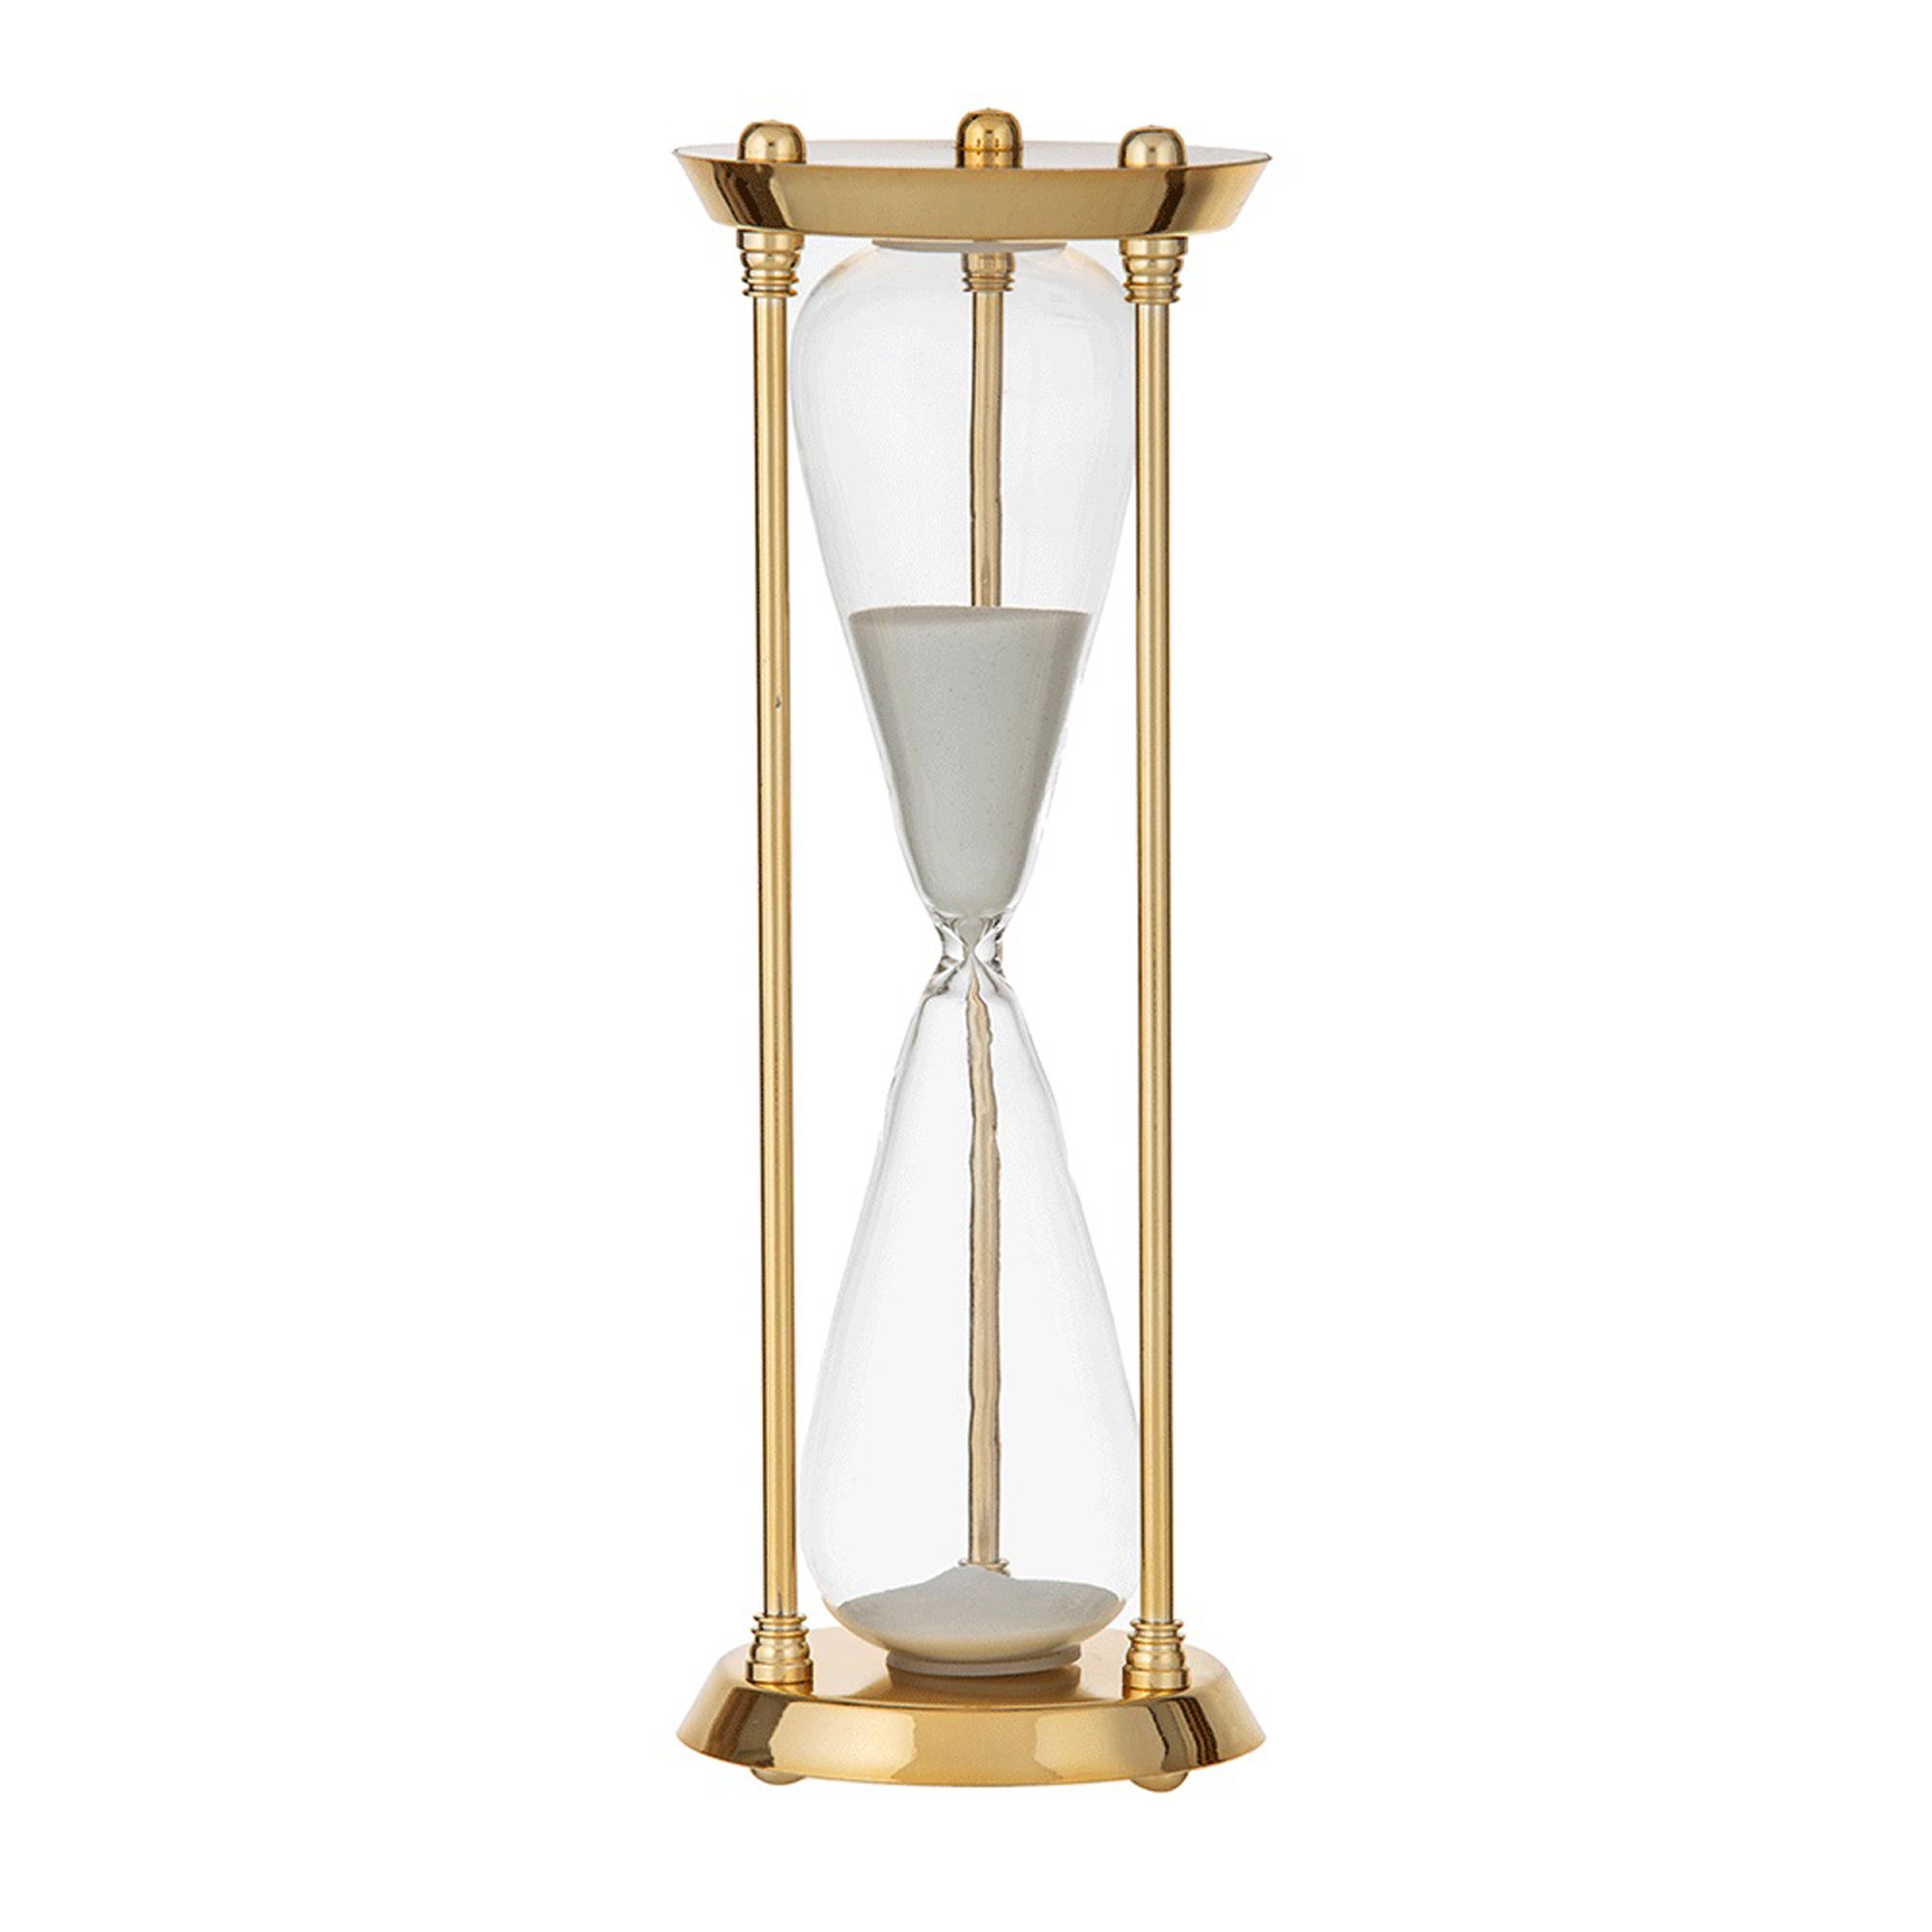 13.YELLOW OCTOPUS Regency Gold &amp; White Hourglass 30 Minutes €27.43, 